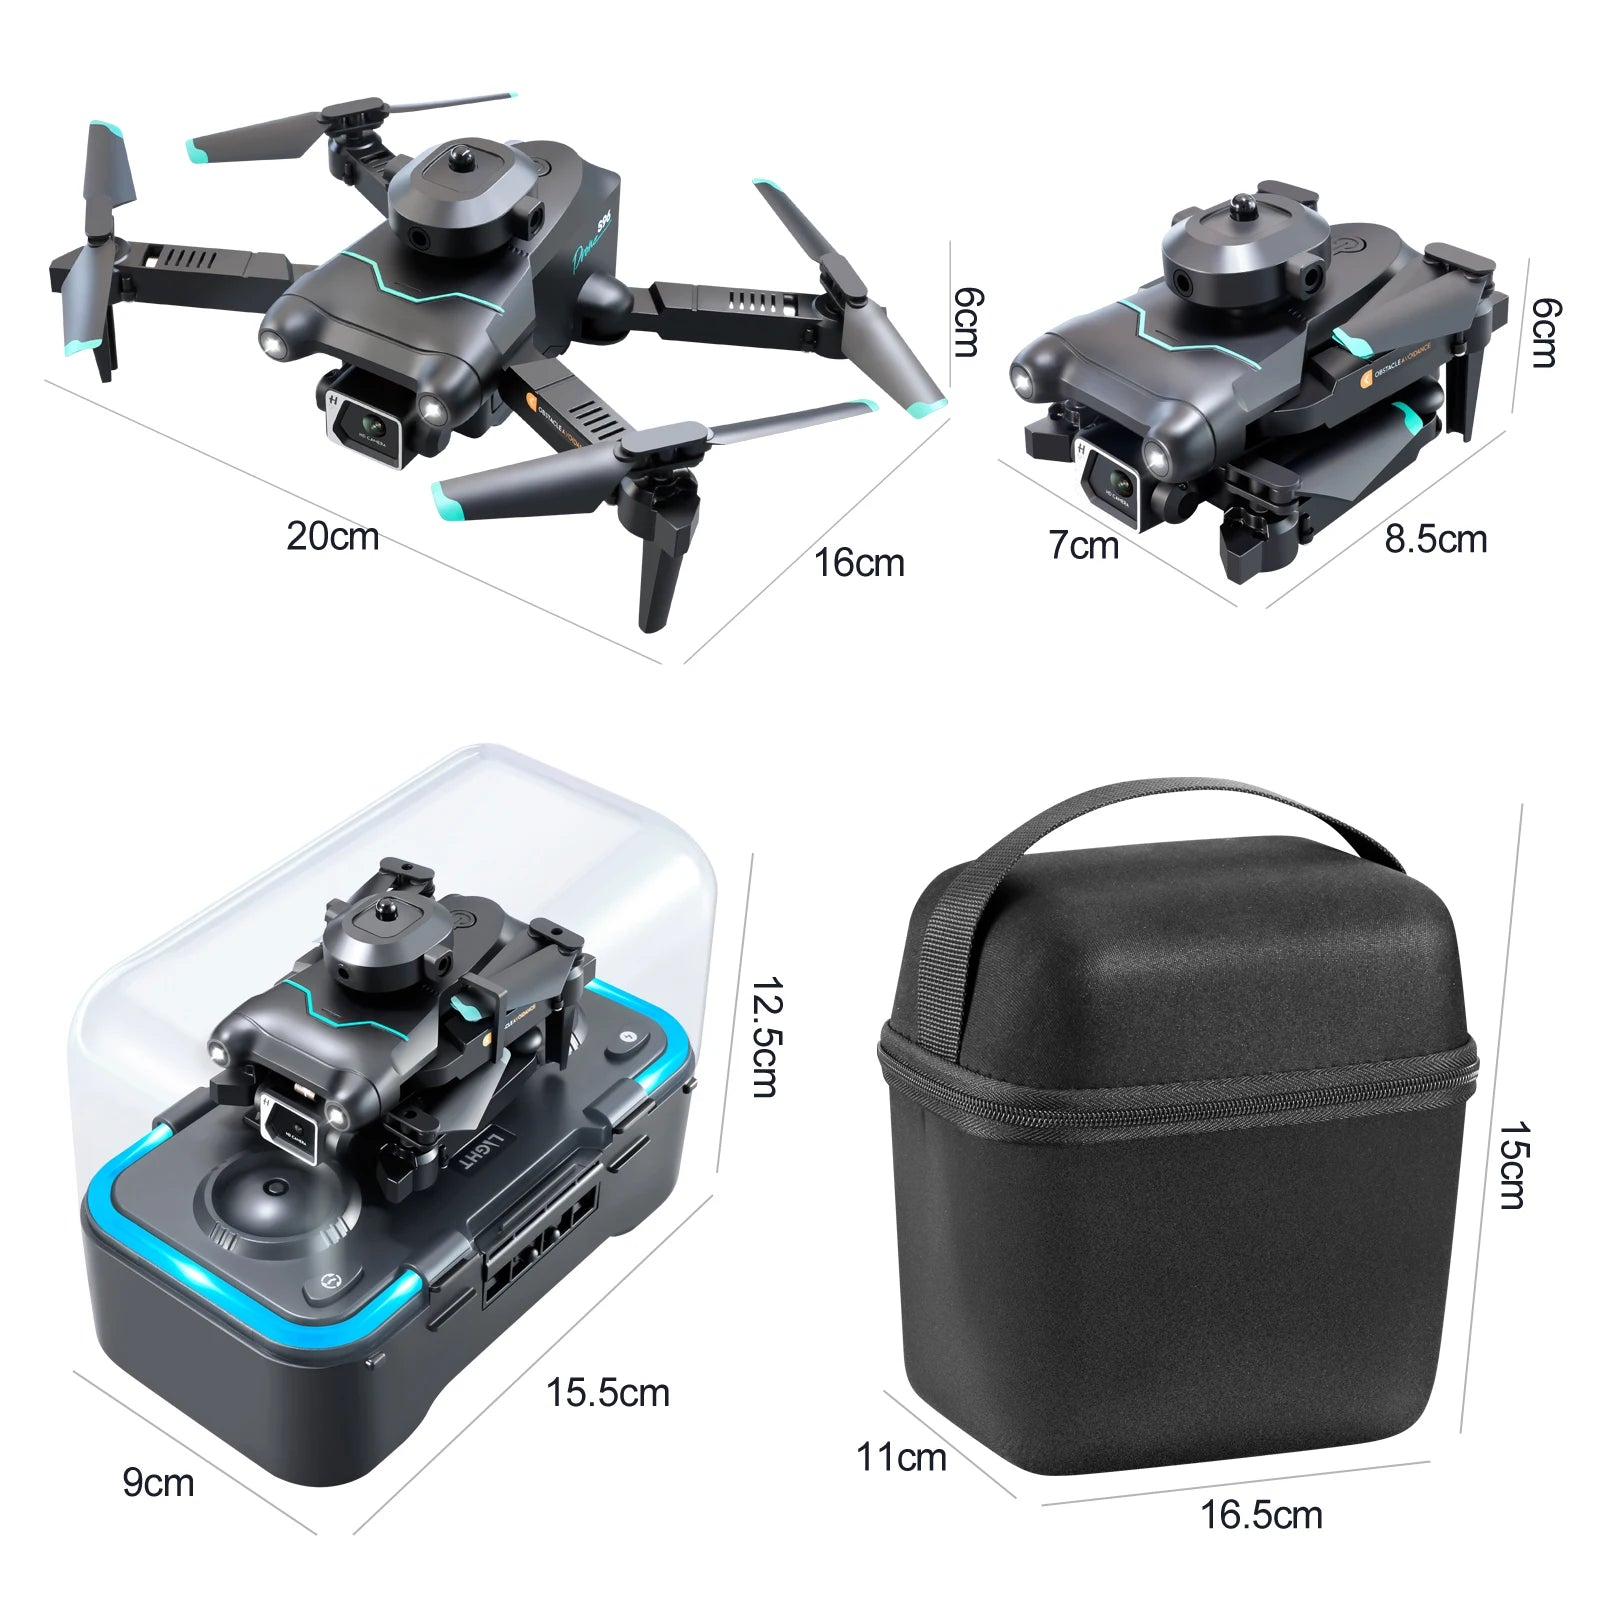 s96 mini drone features : fpv capable features